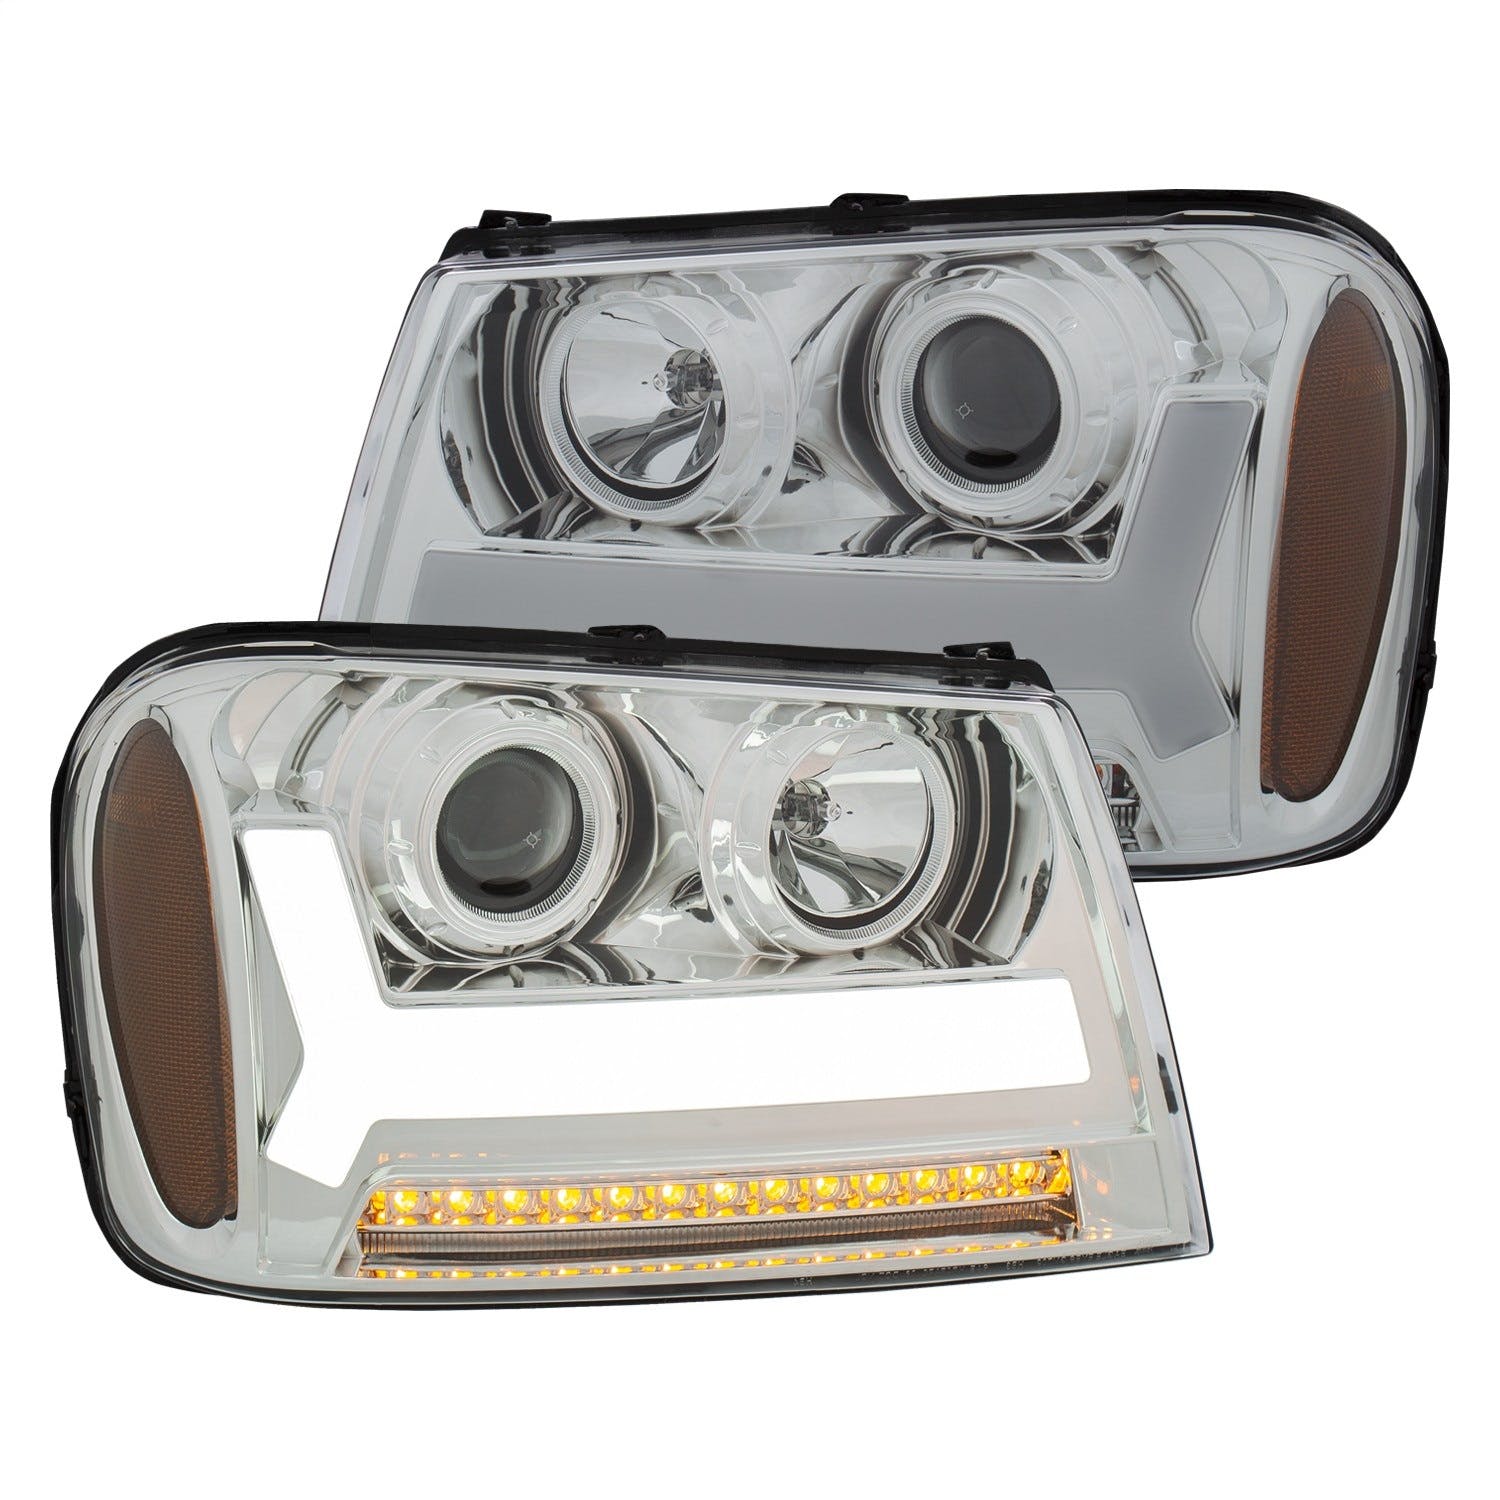 AnzoUSA 111391 Projector Headlights with Plank Style Design Chrome with Amber